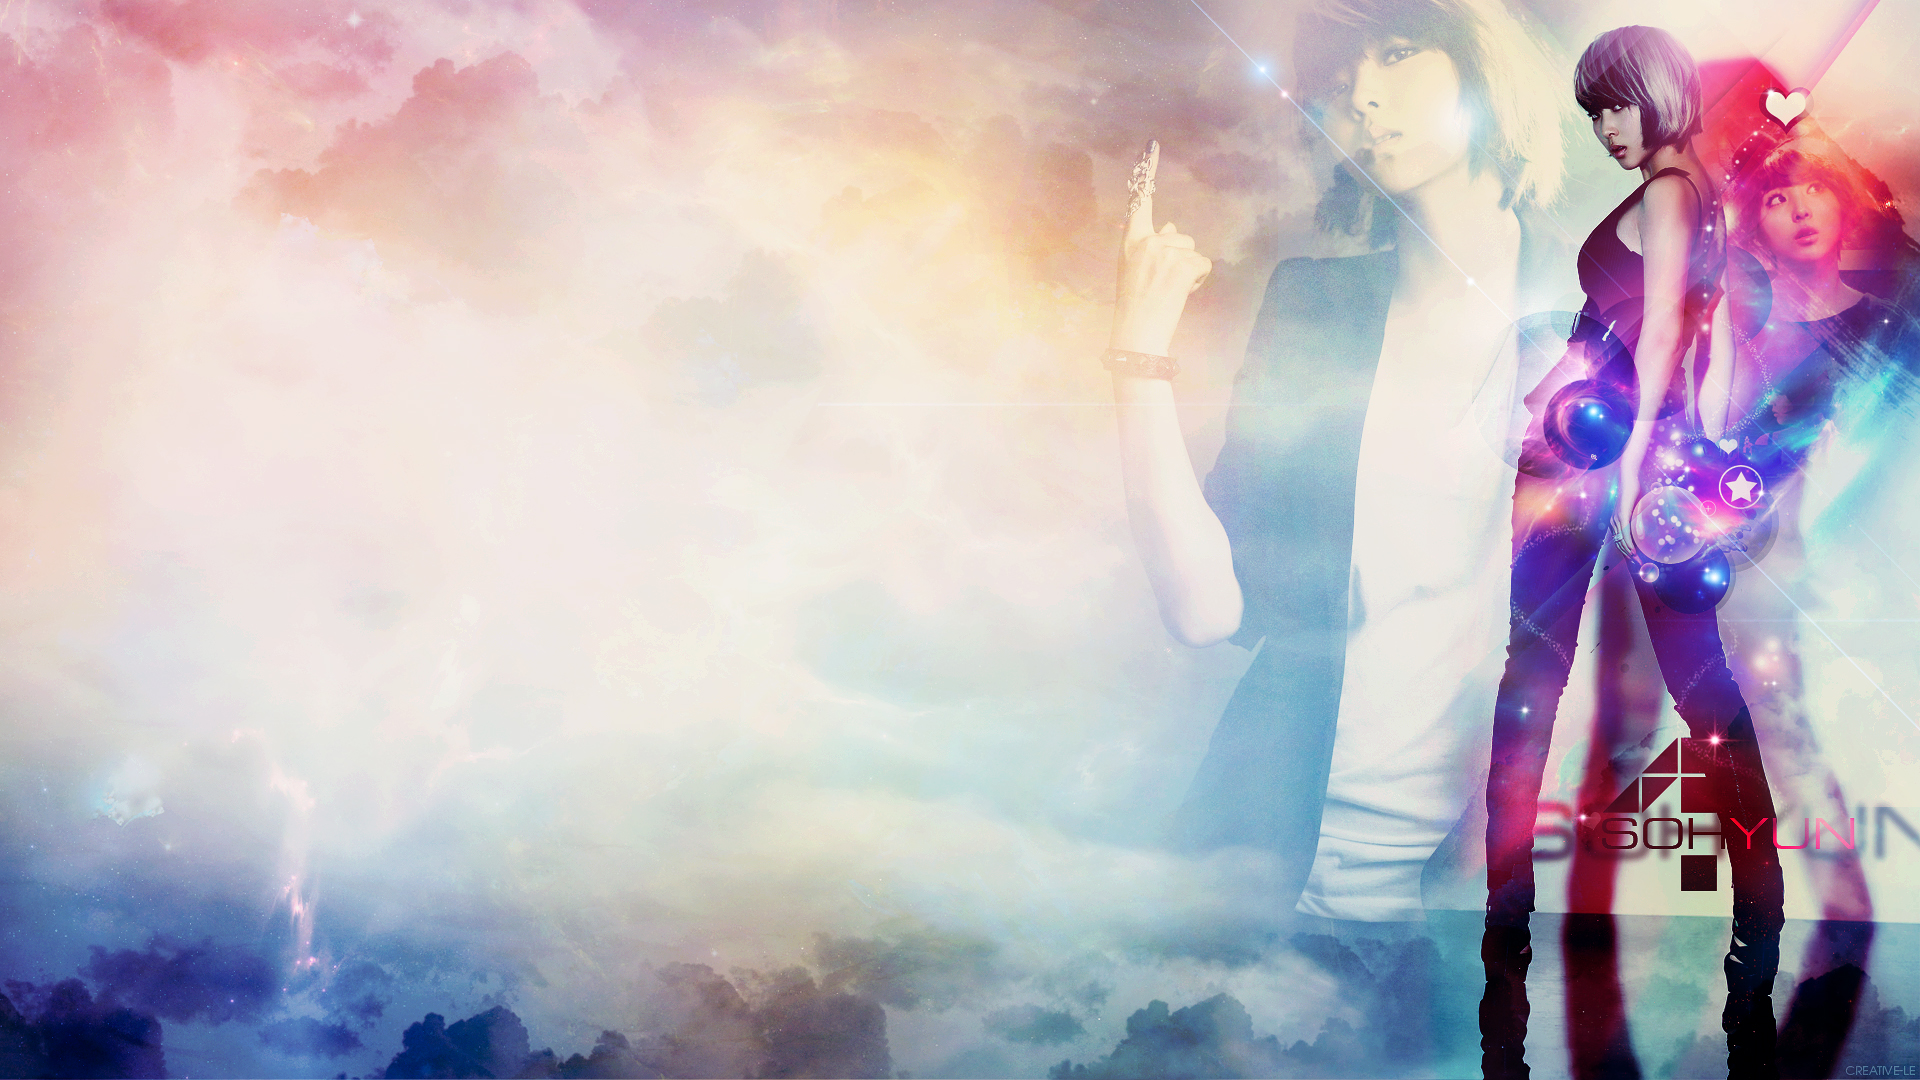 Kpop Backgrounds Free Download